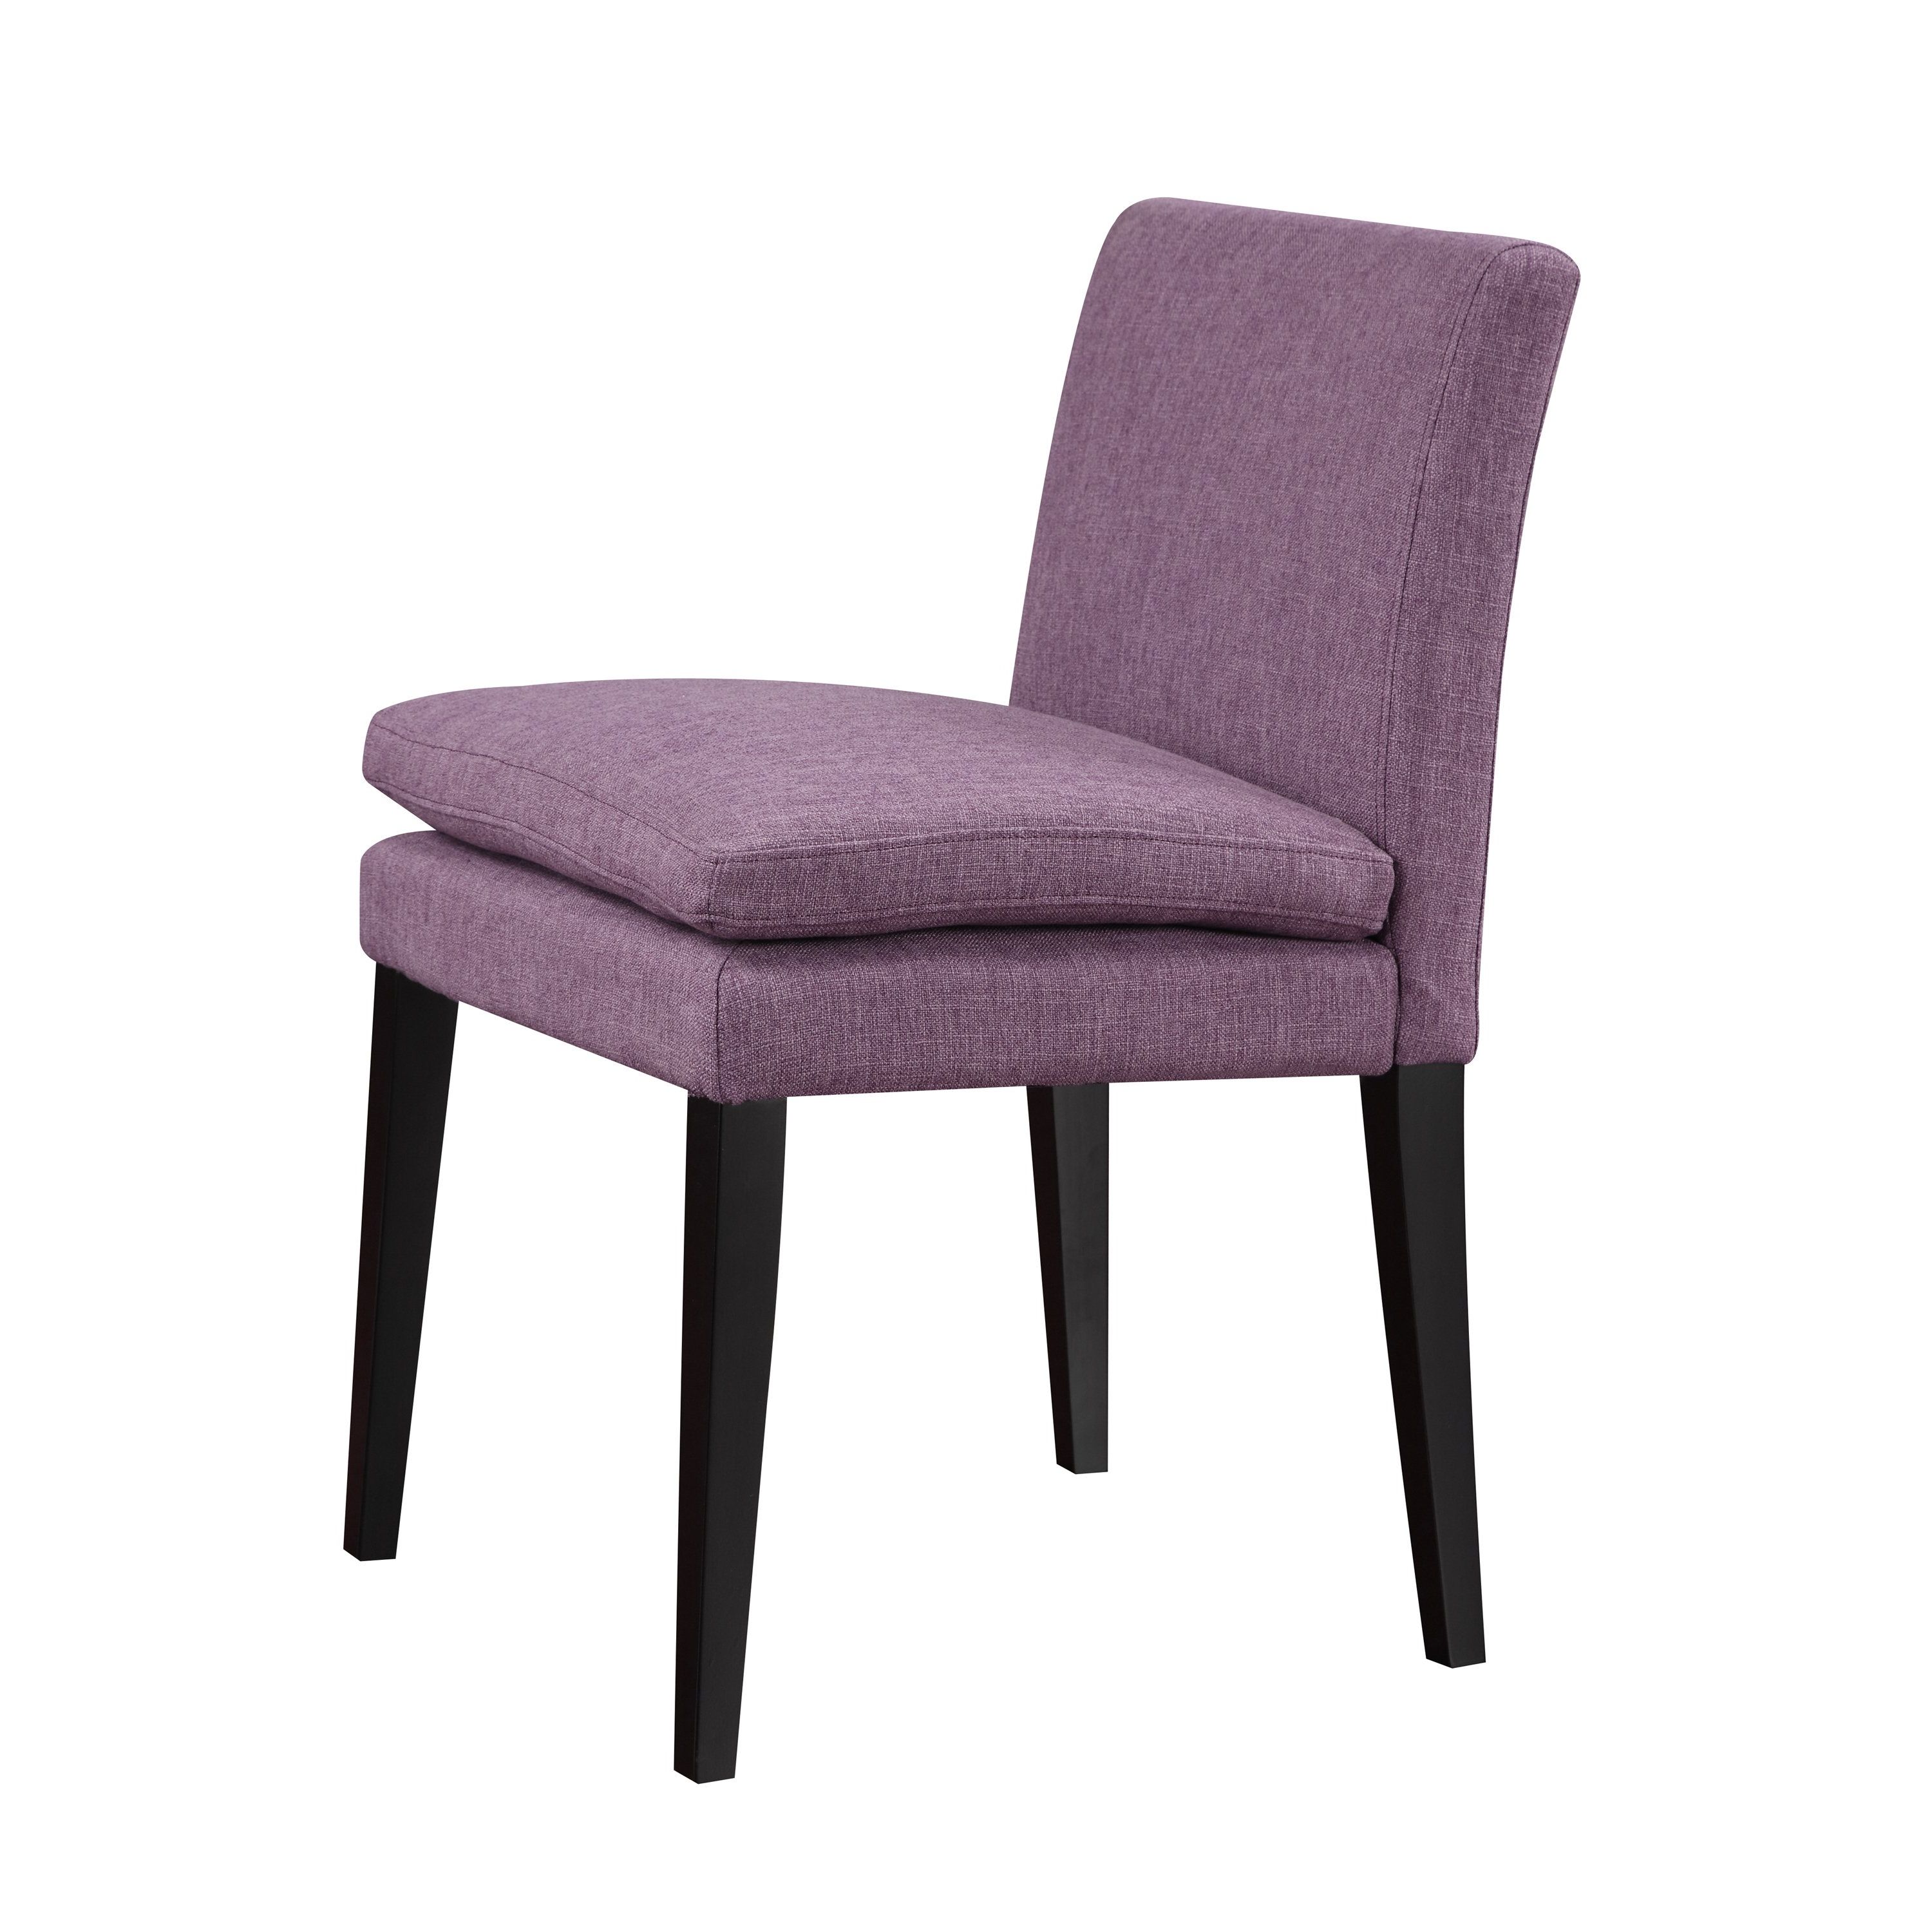 Shop Handy Living Orion Amethyst Purple Linen Upholstered Dining Regarding Most Up To Date Orion Side Chairs (View 6 of 20)